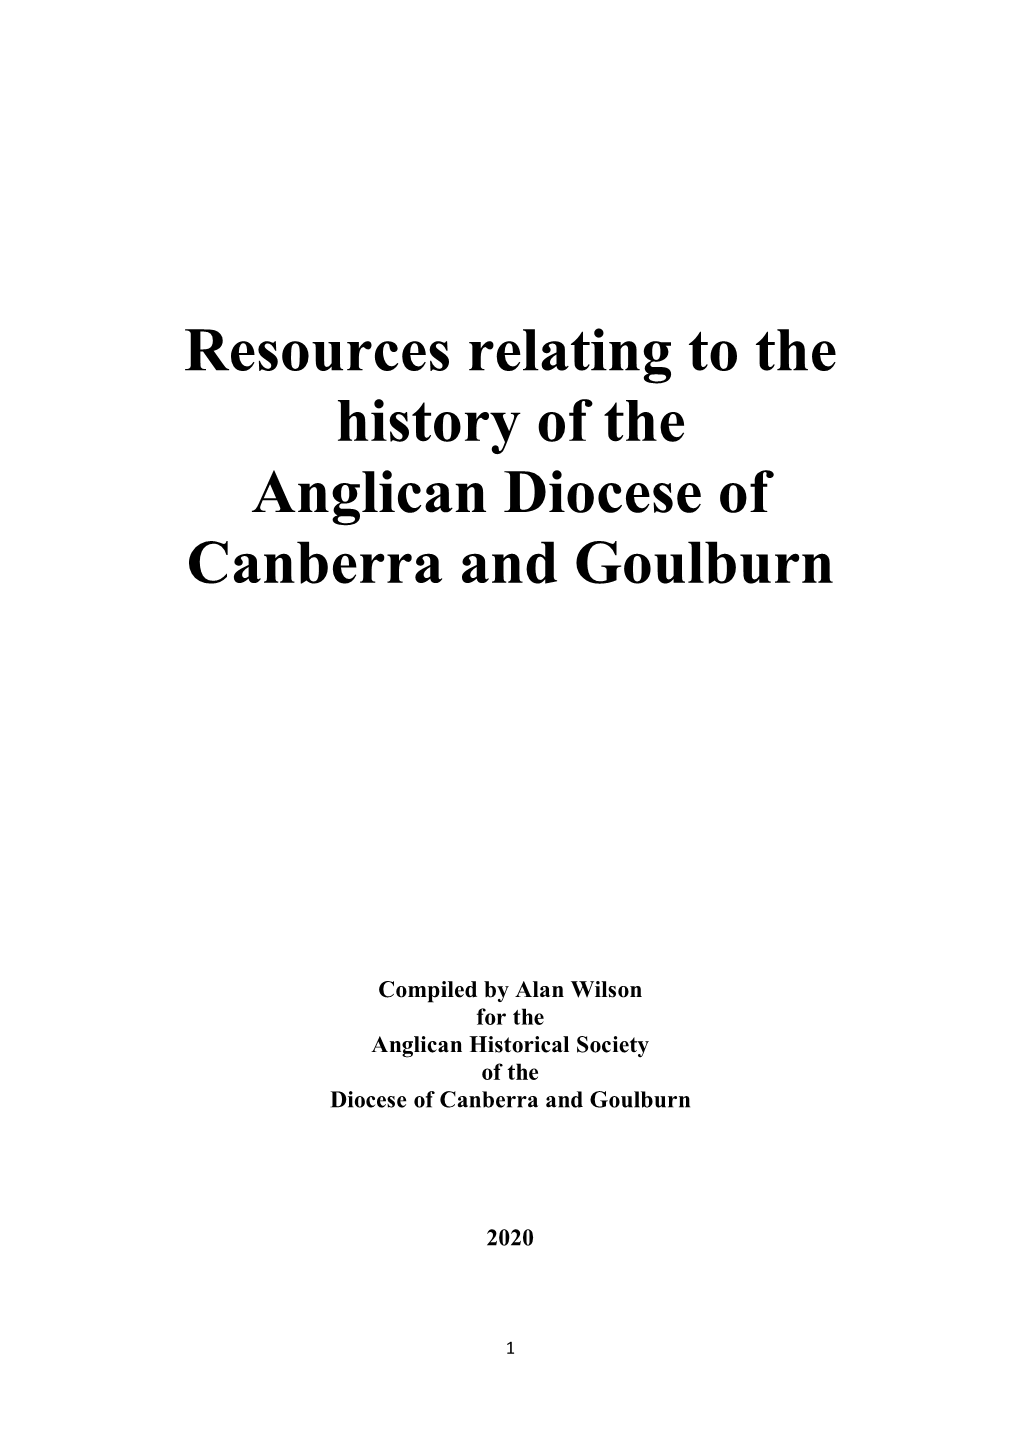 Resources Relating to the History of the Anglican Diocese of Canberra and Goulburn